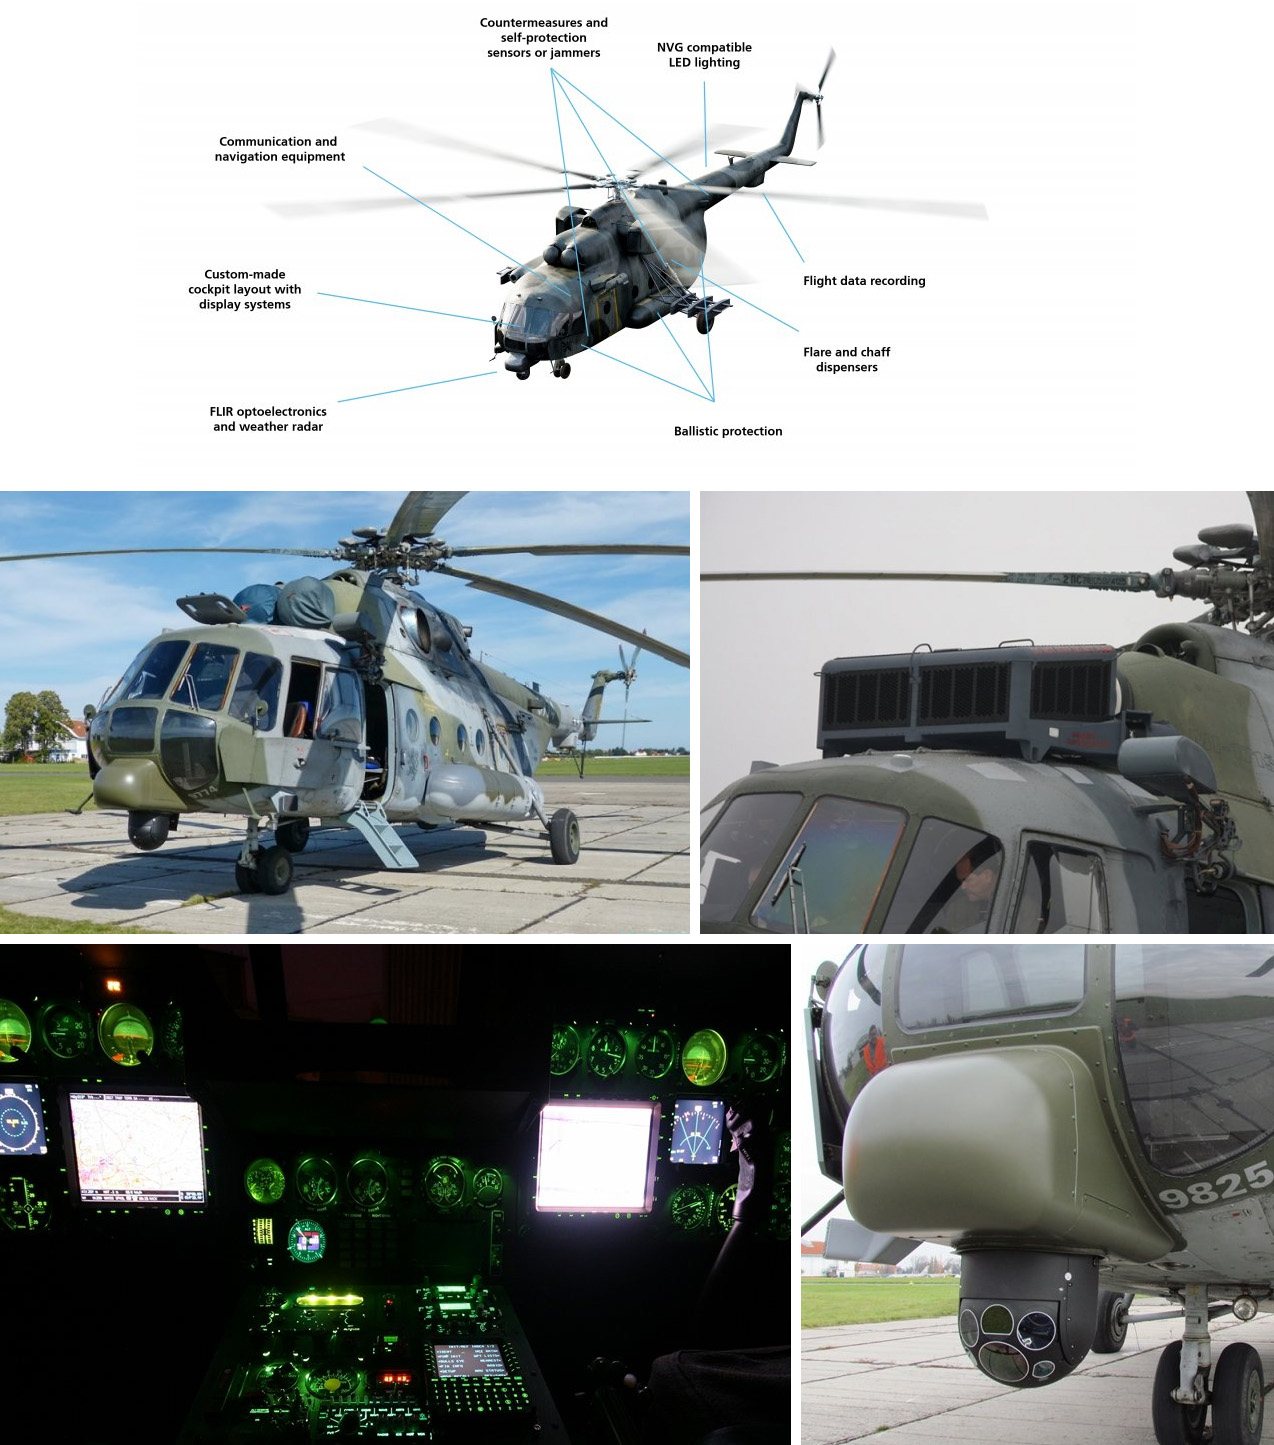 German manufacturer introduces advanced threat detection and countermeasures for Ukrainian helicopters Defense Express Hensoldt Supplies Airborne Missile Protection System to Ukraine, Enhancing Helicopter Defense Capabilities